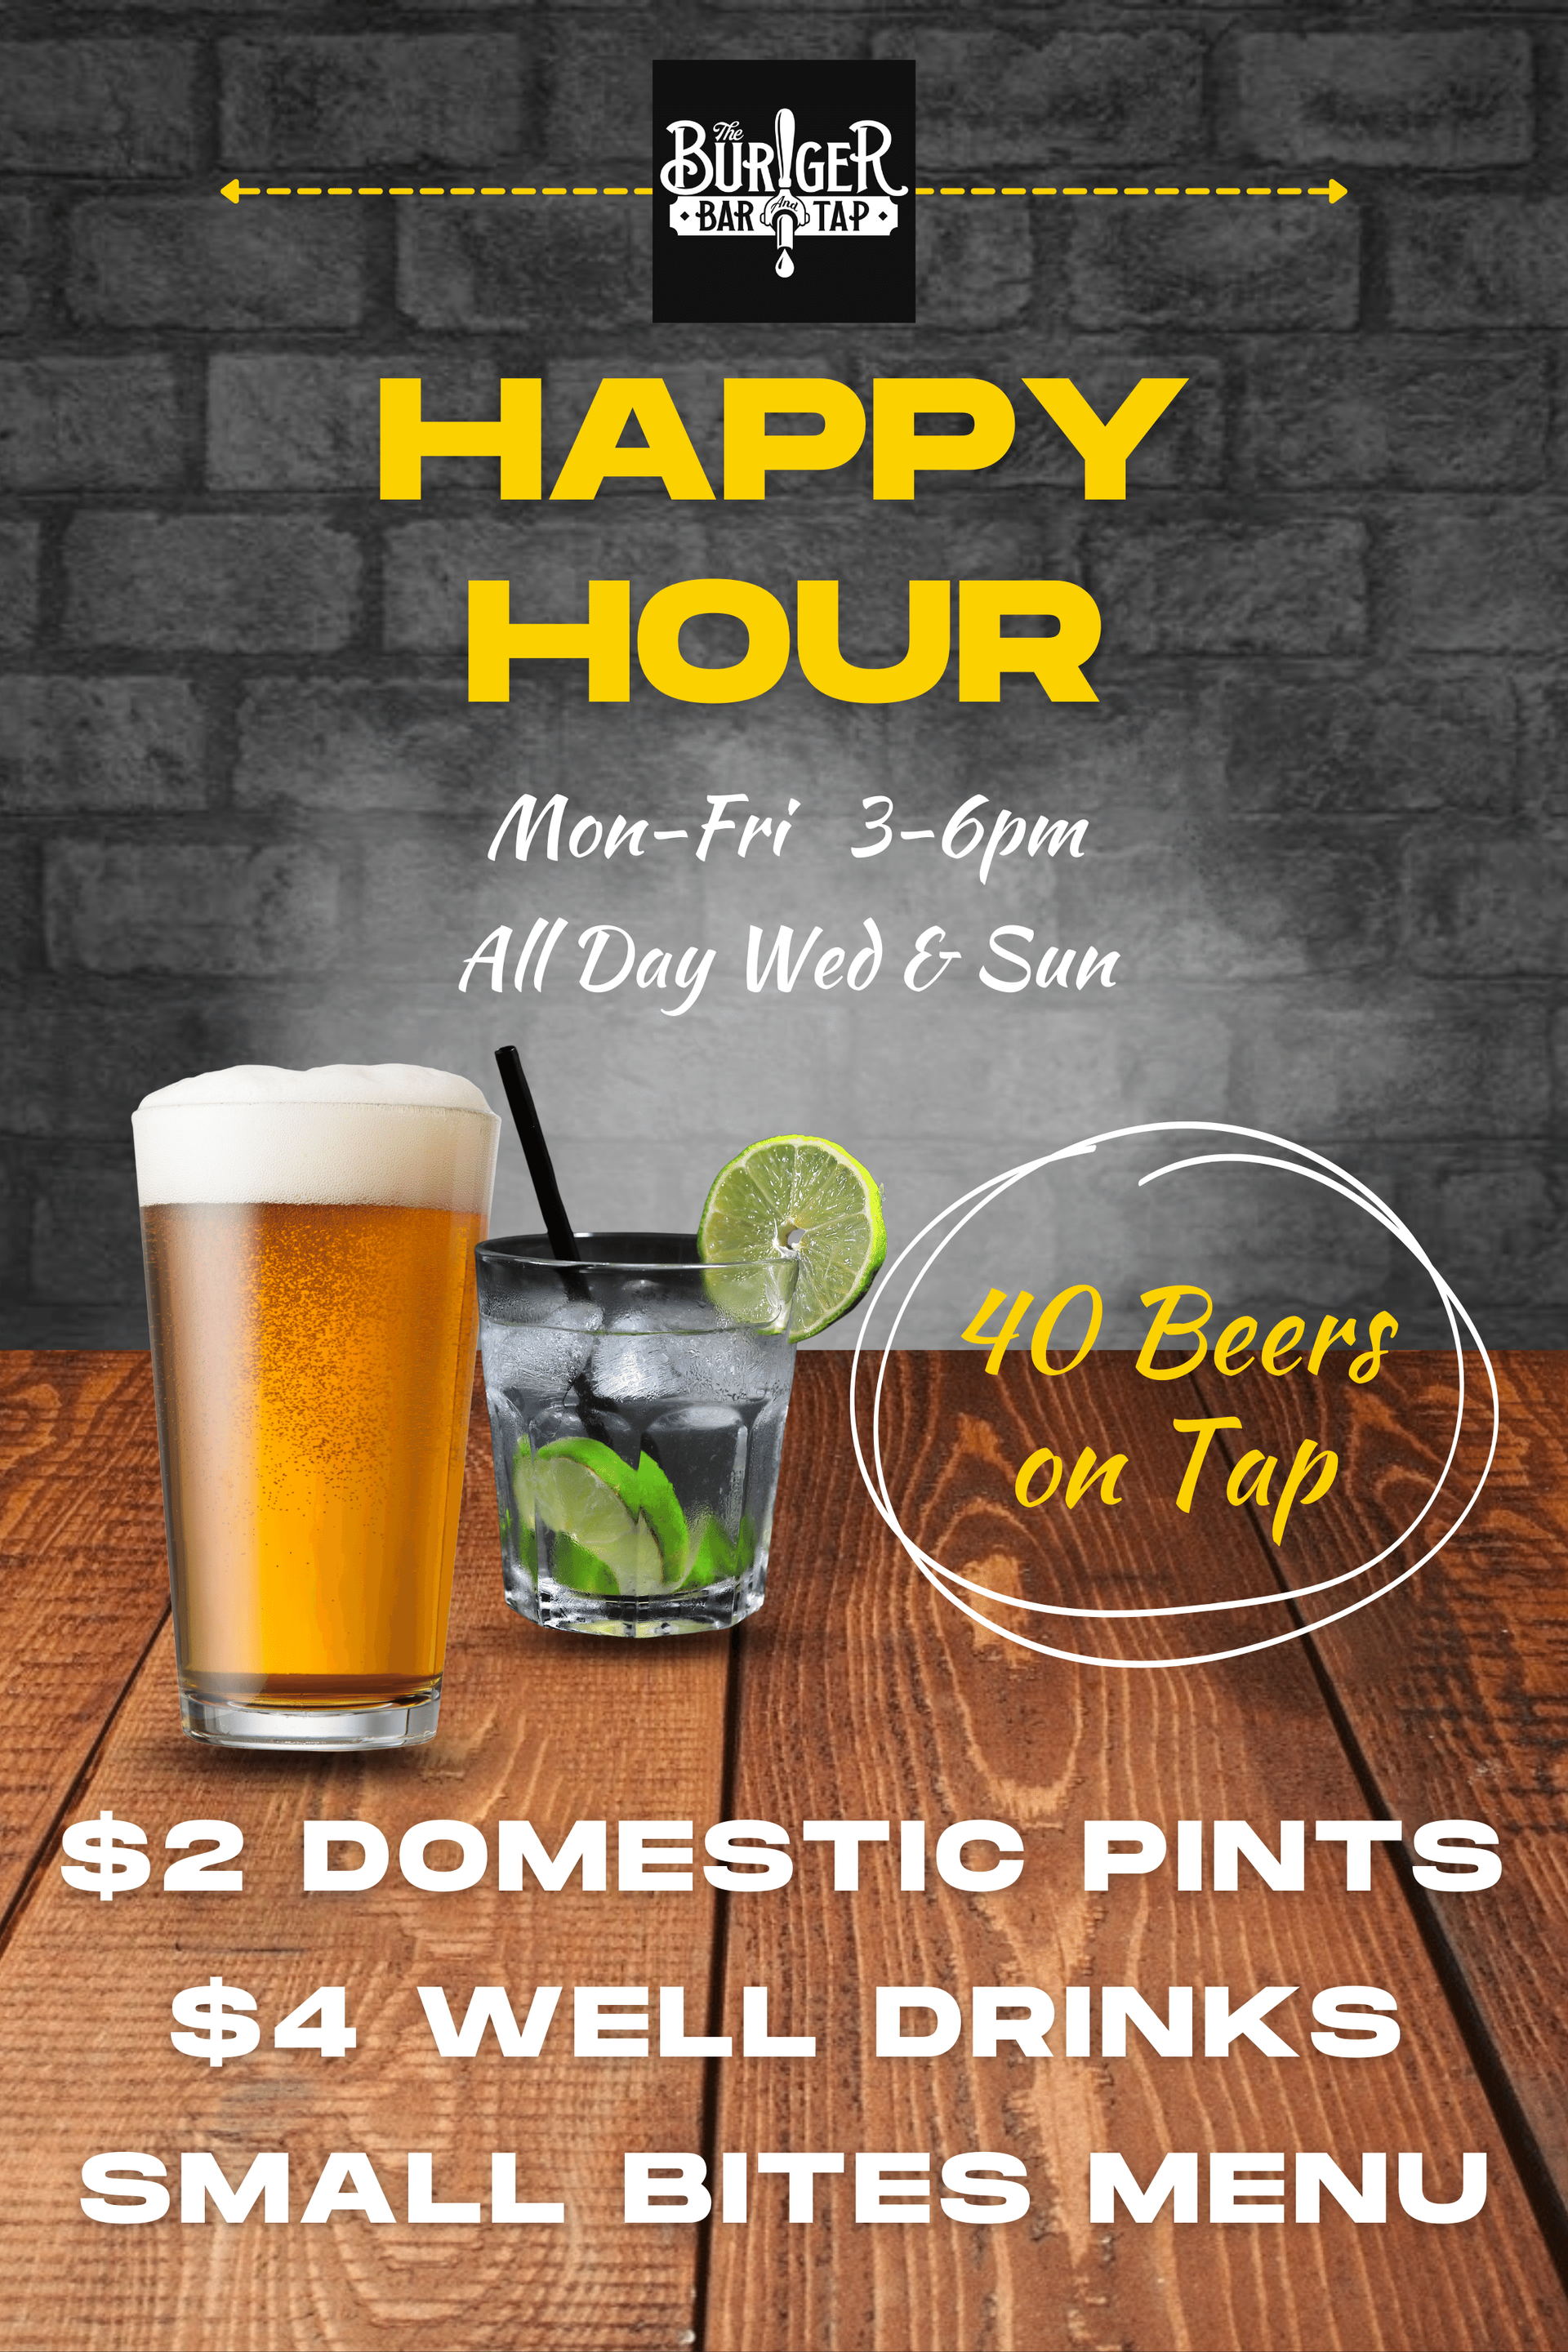 BB&T Happy Hour Beer and Food